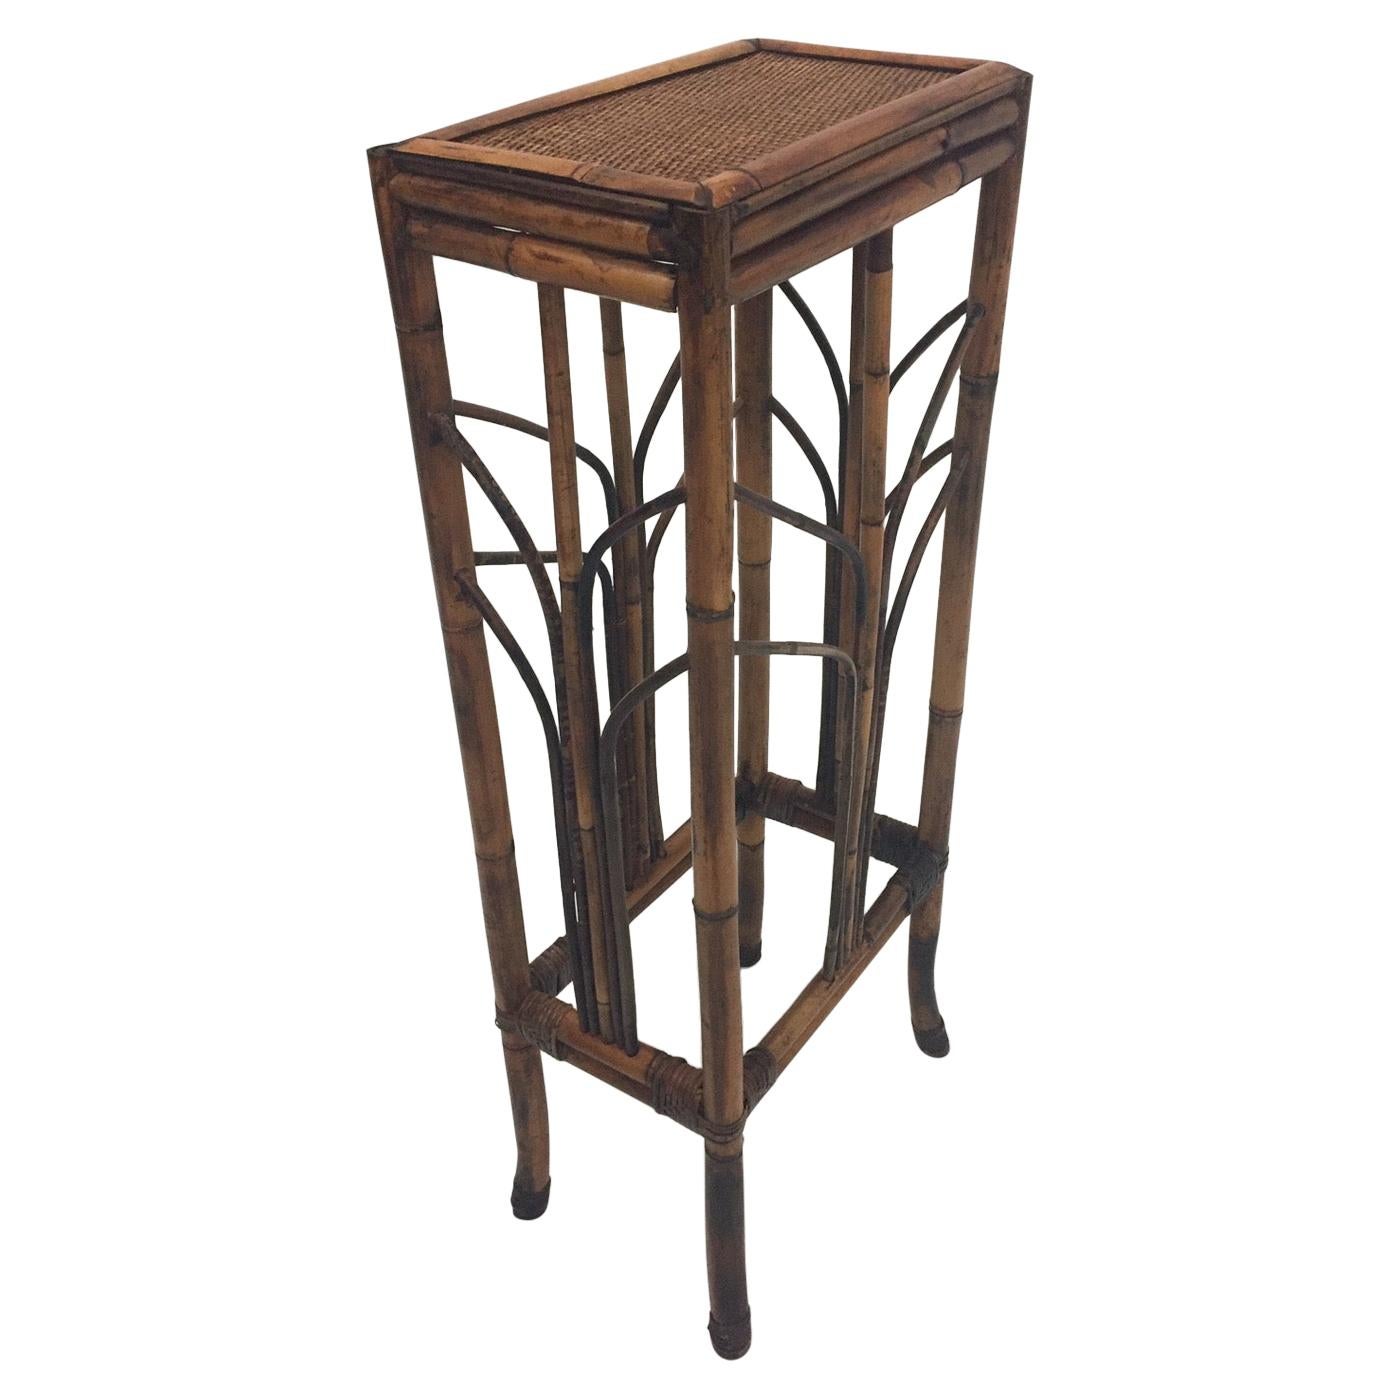 Classic Vintage Tall Bamboo Pedestal